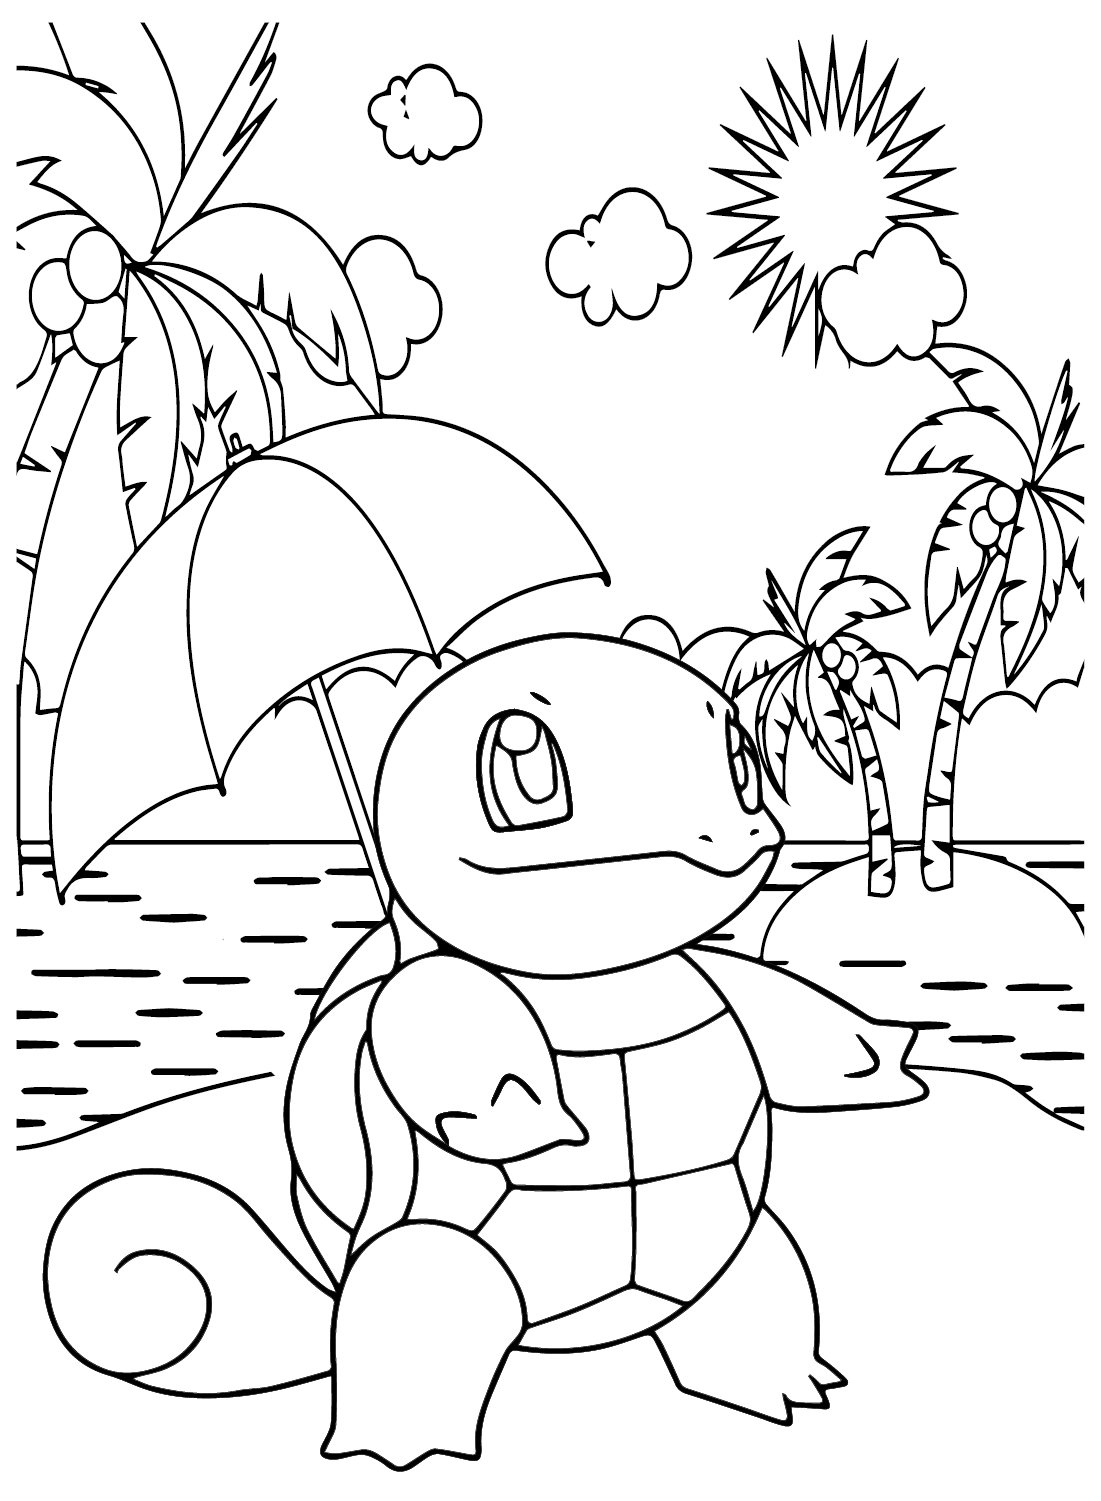 Squirtle Pokemon Coloring Page from Squirtle